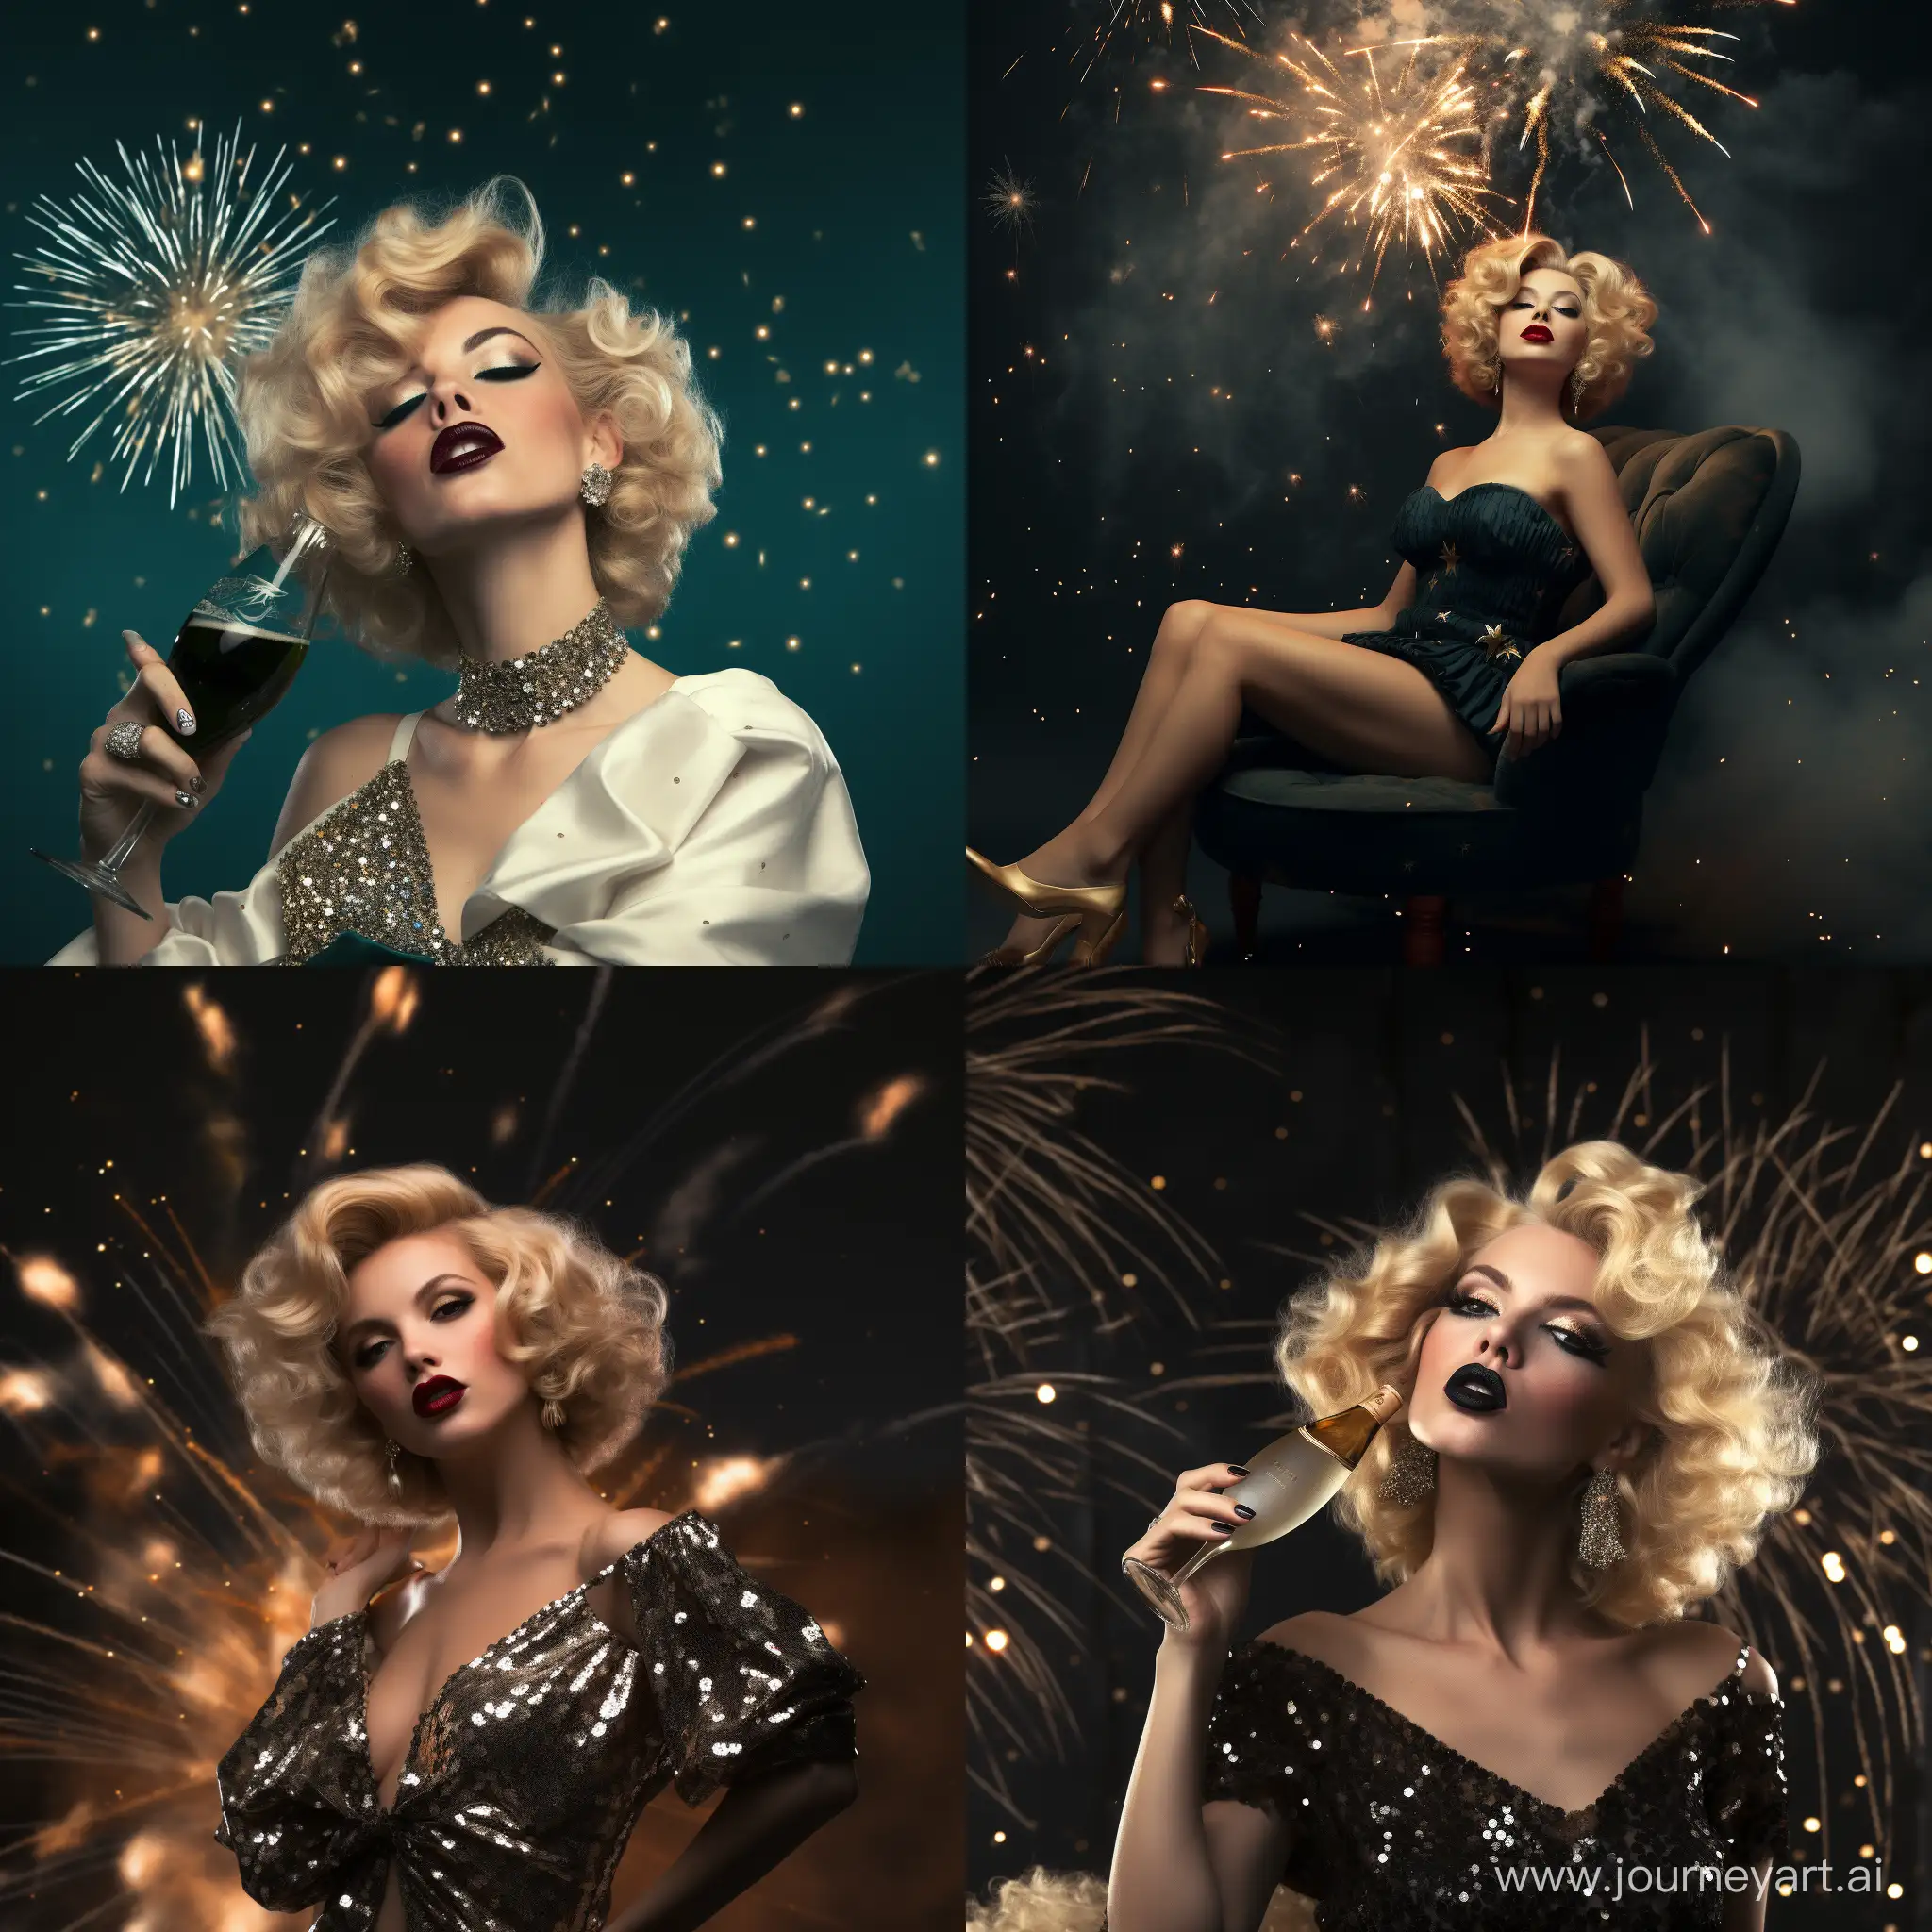 Marilyn-Monroe-Celebrating-New-Years-Eve-with-Champagne-and-Fireworks